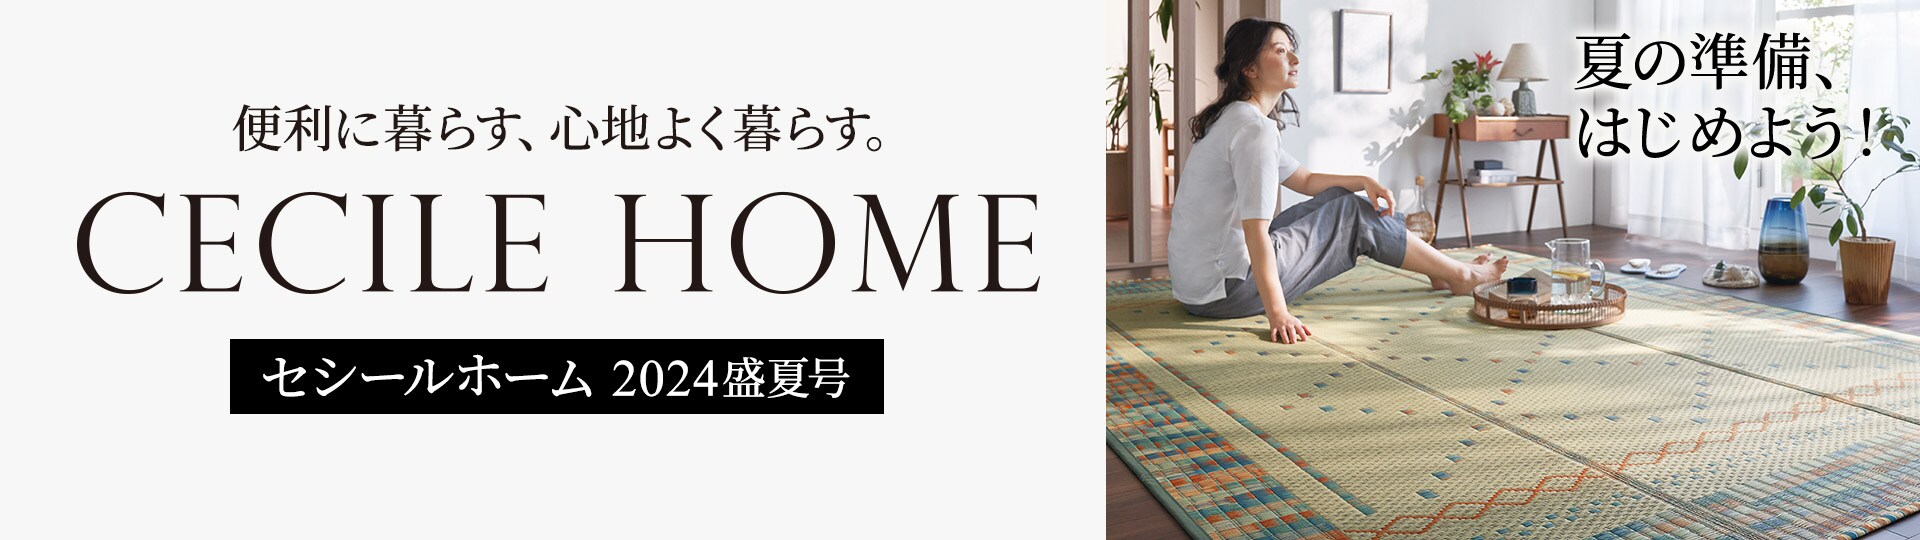 CECILE HOME カタログ